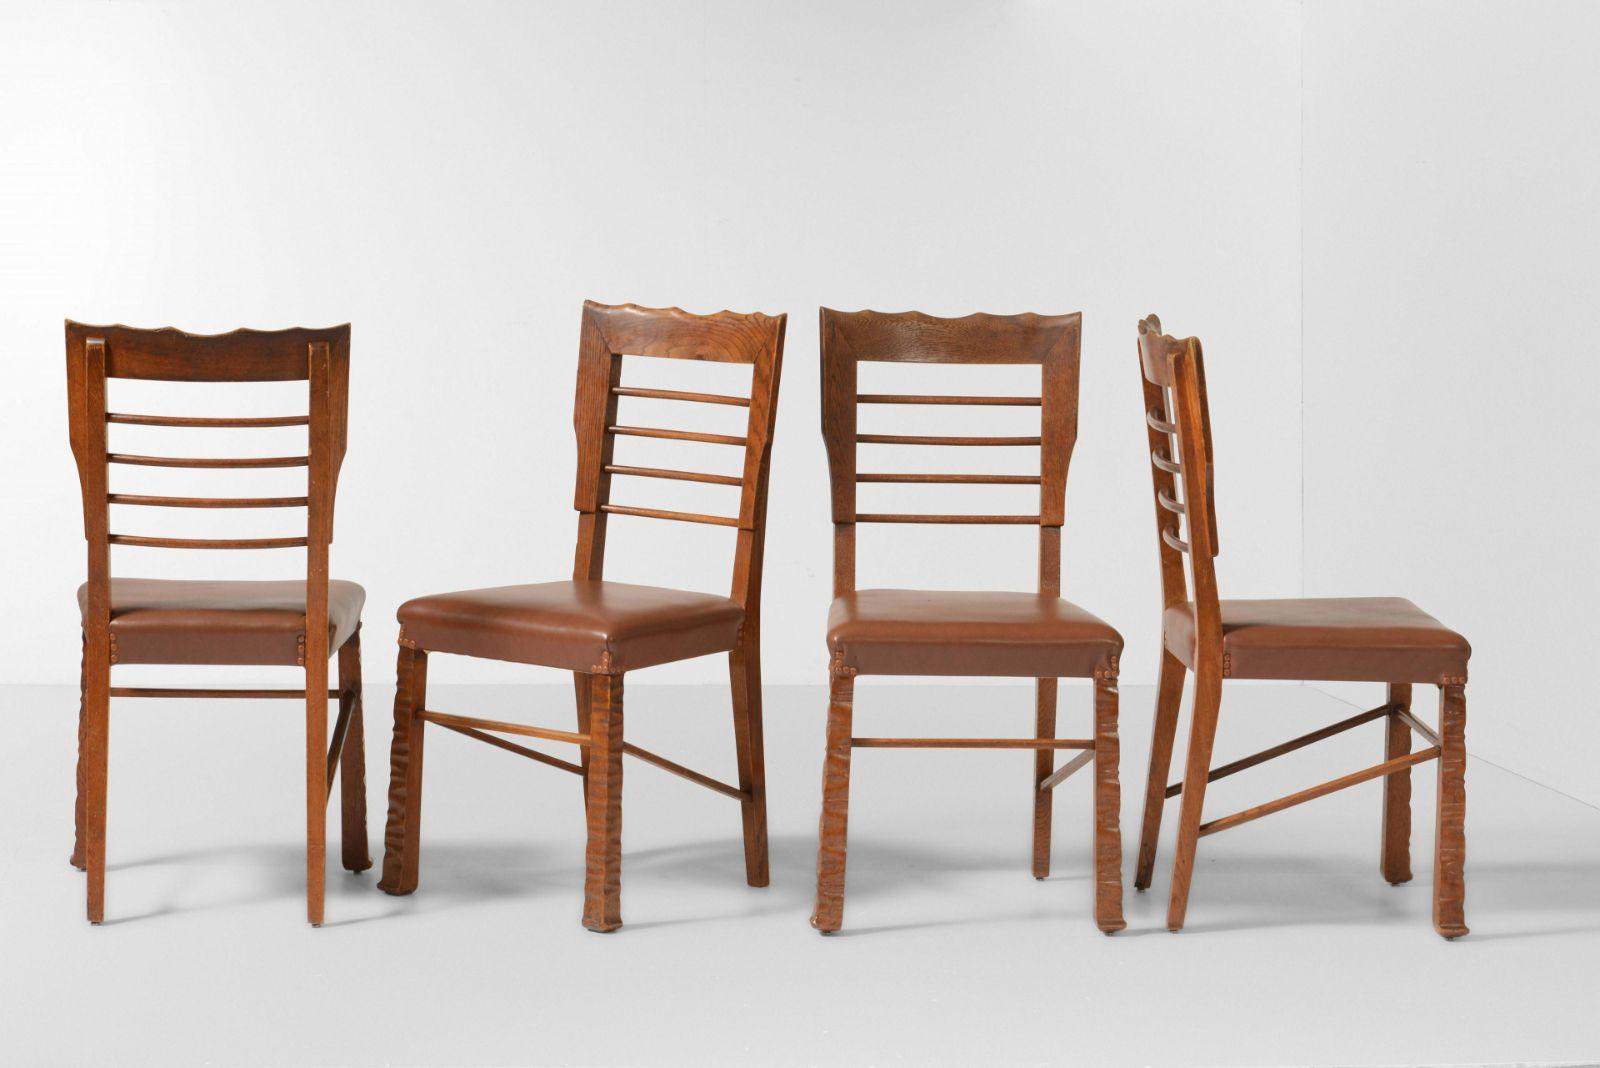 Italian Vittorio Valabrega Rustic Scalloped Edge Dining Chairs, Set of 10, Italy, 1940's For Sale